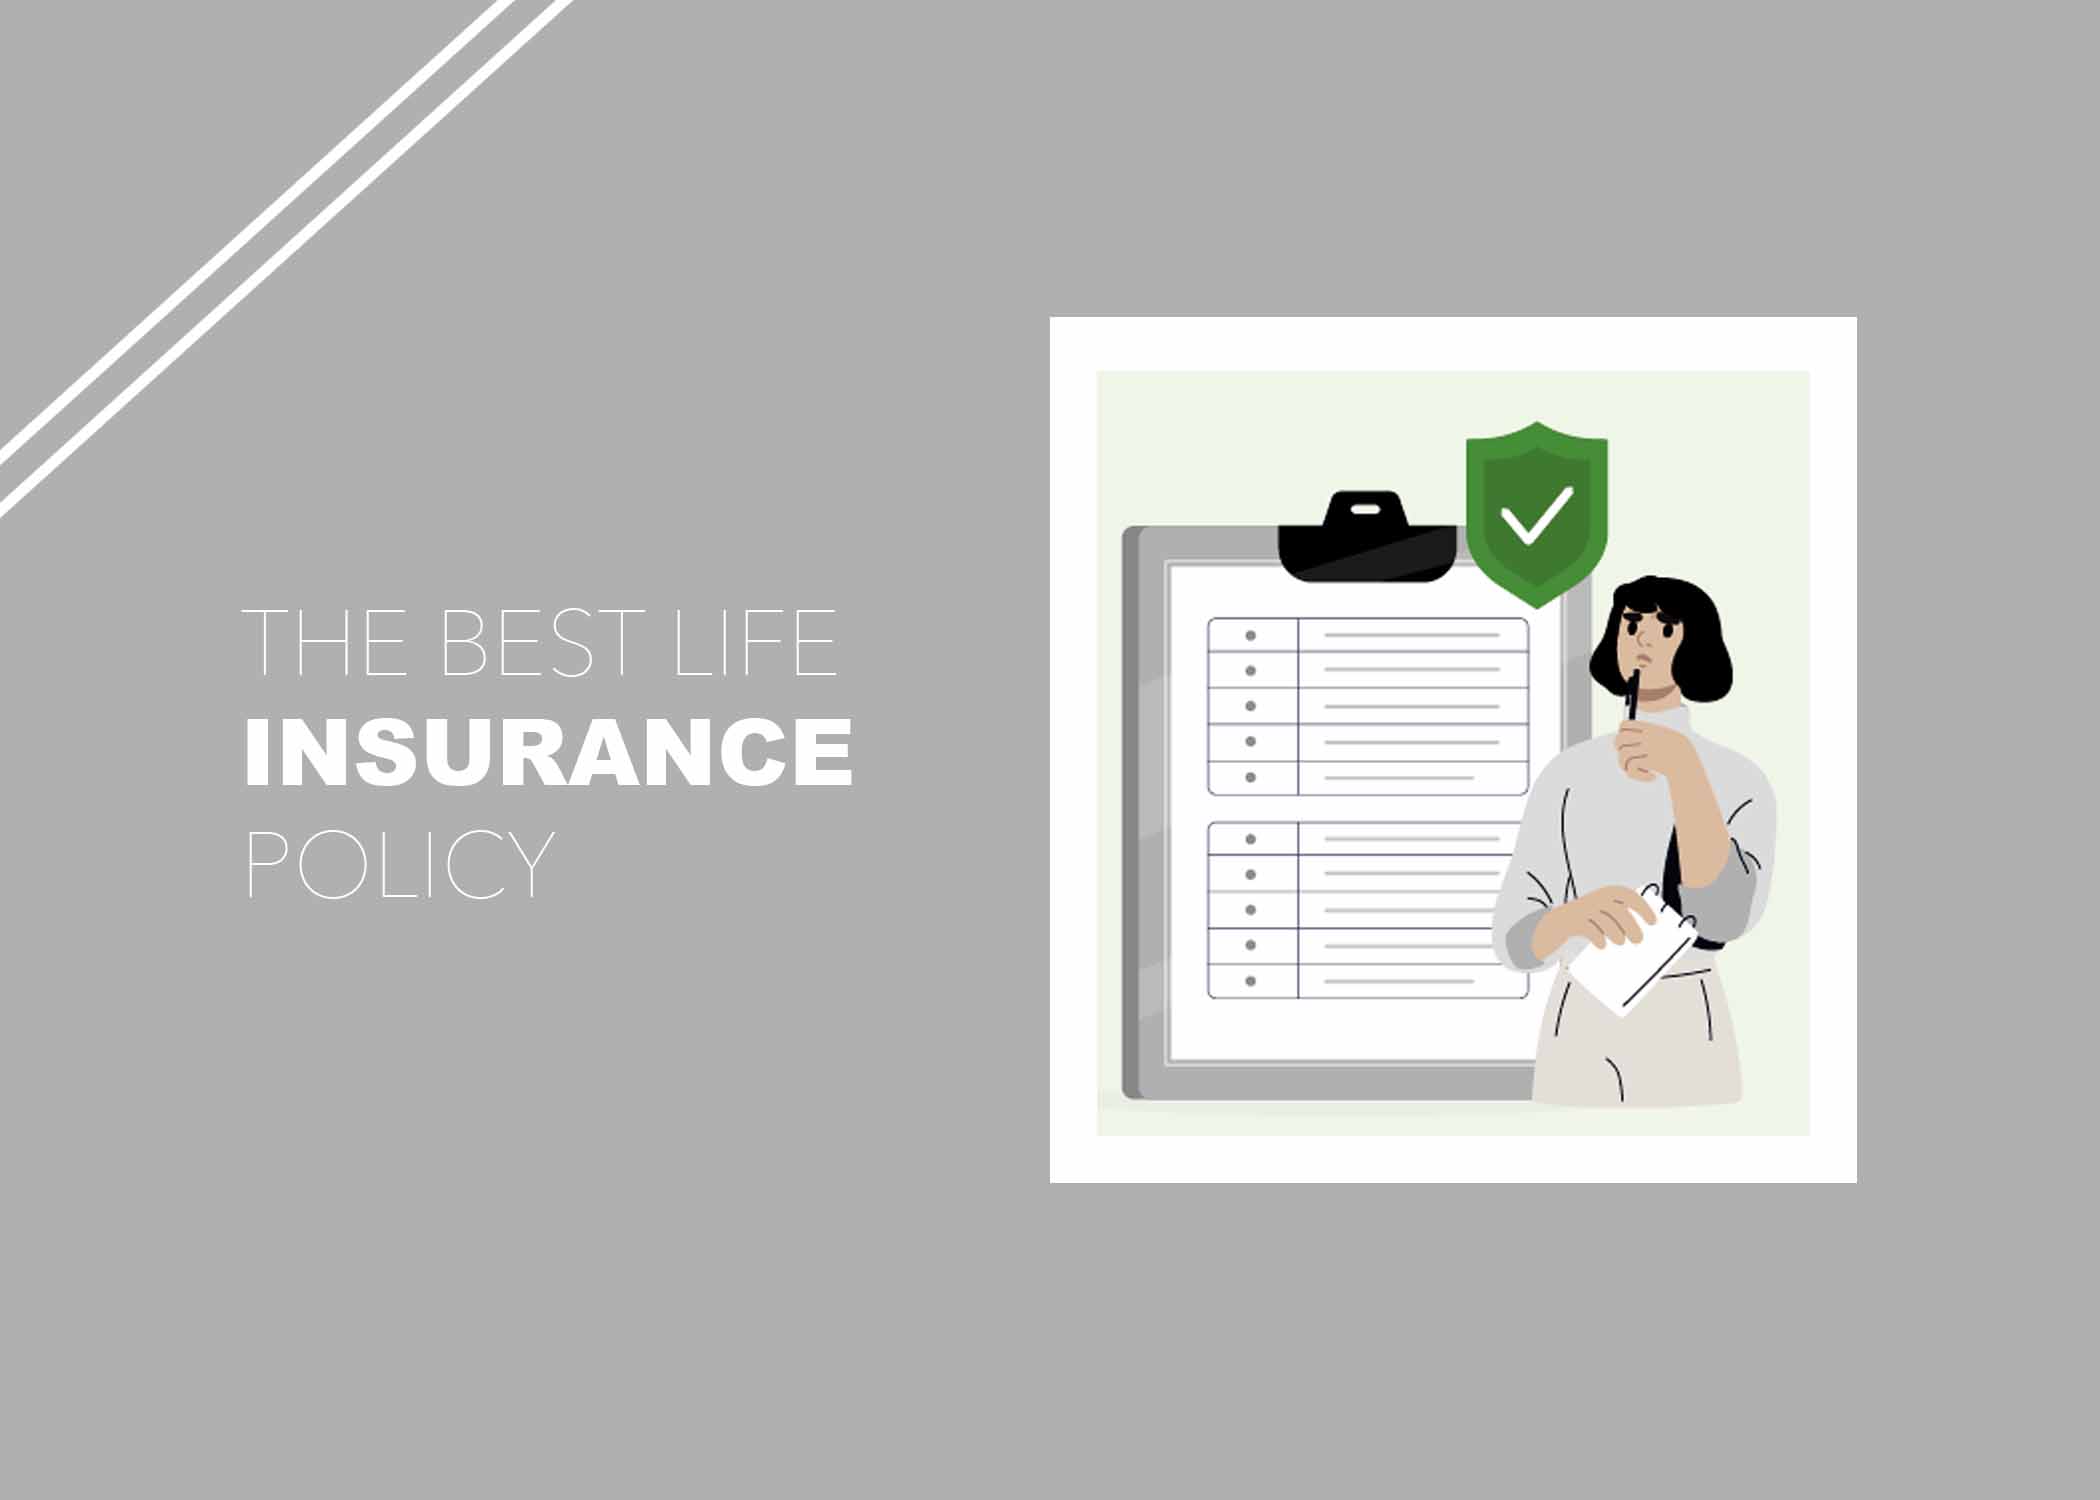 The Best Life Insurance Policy